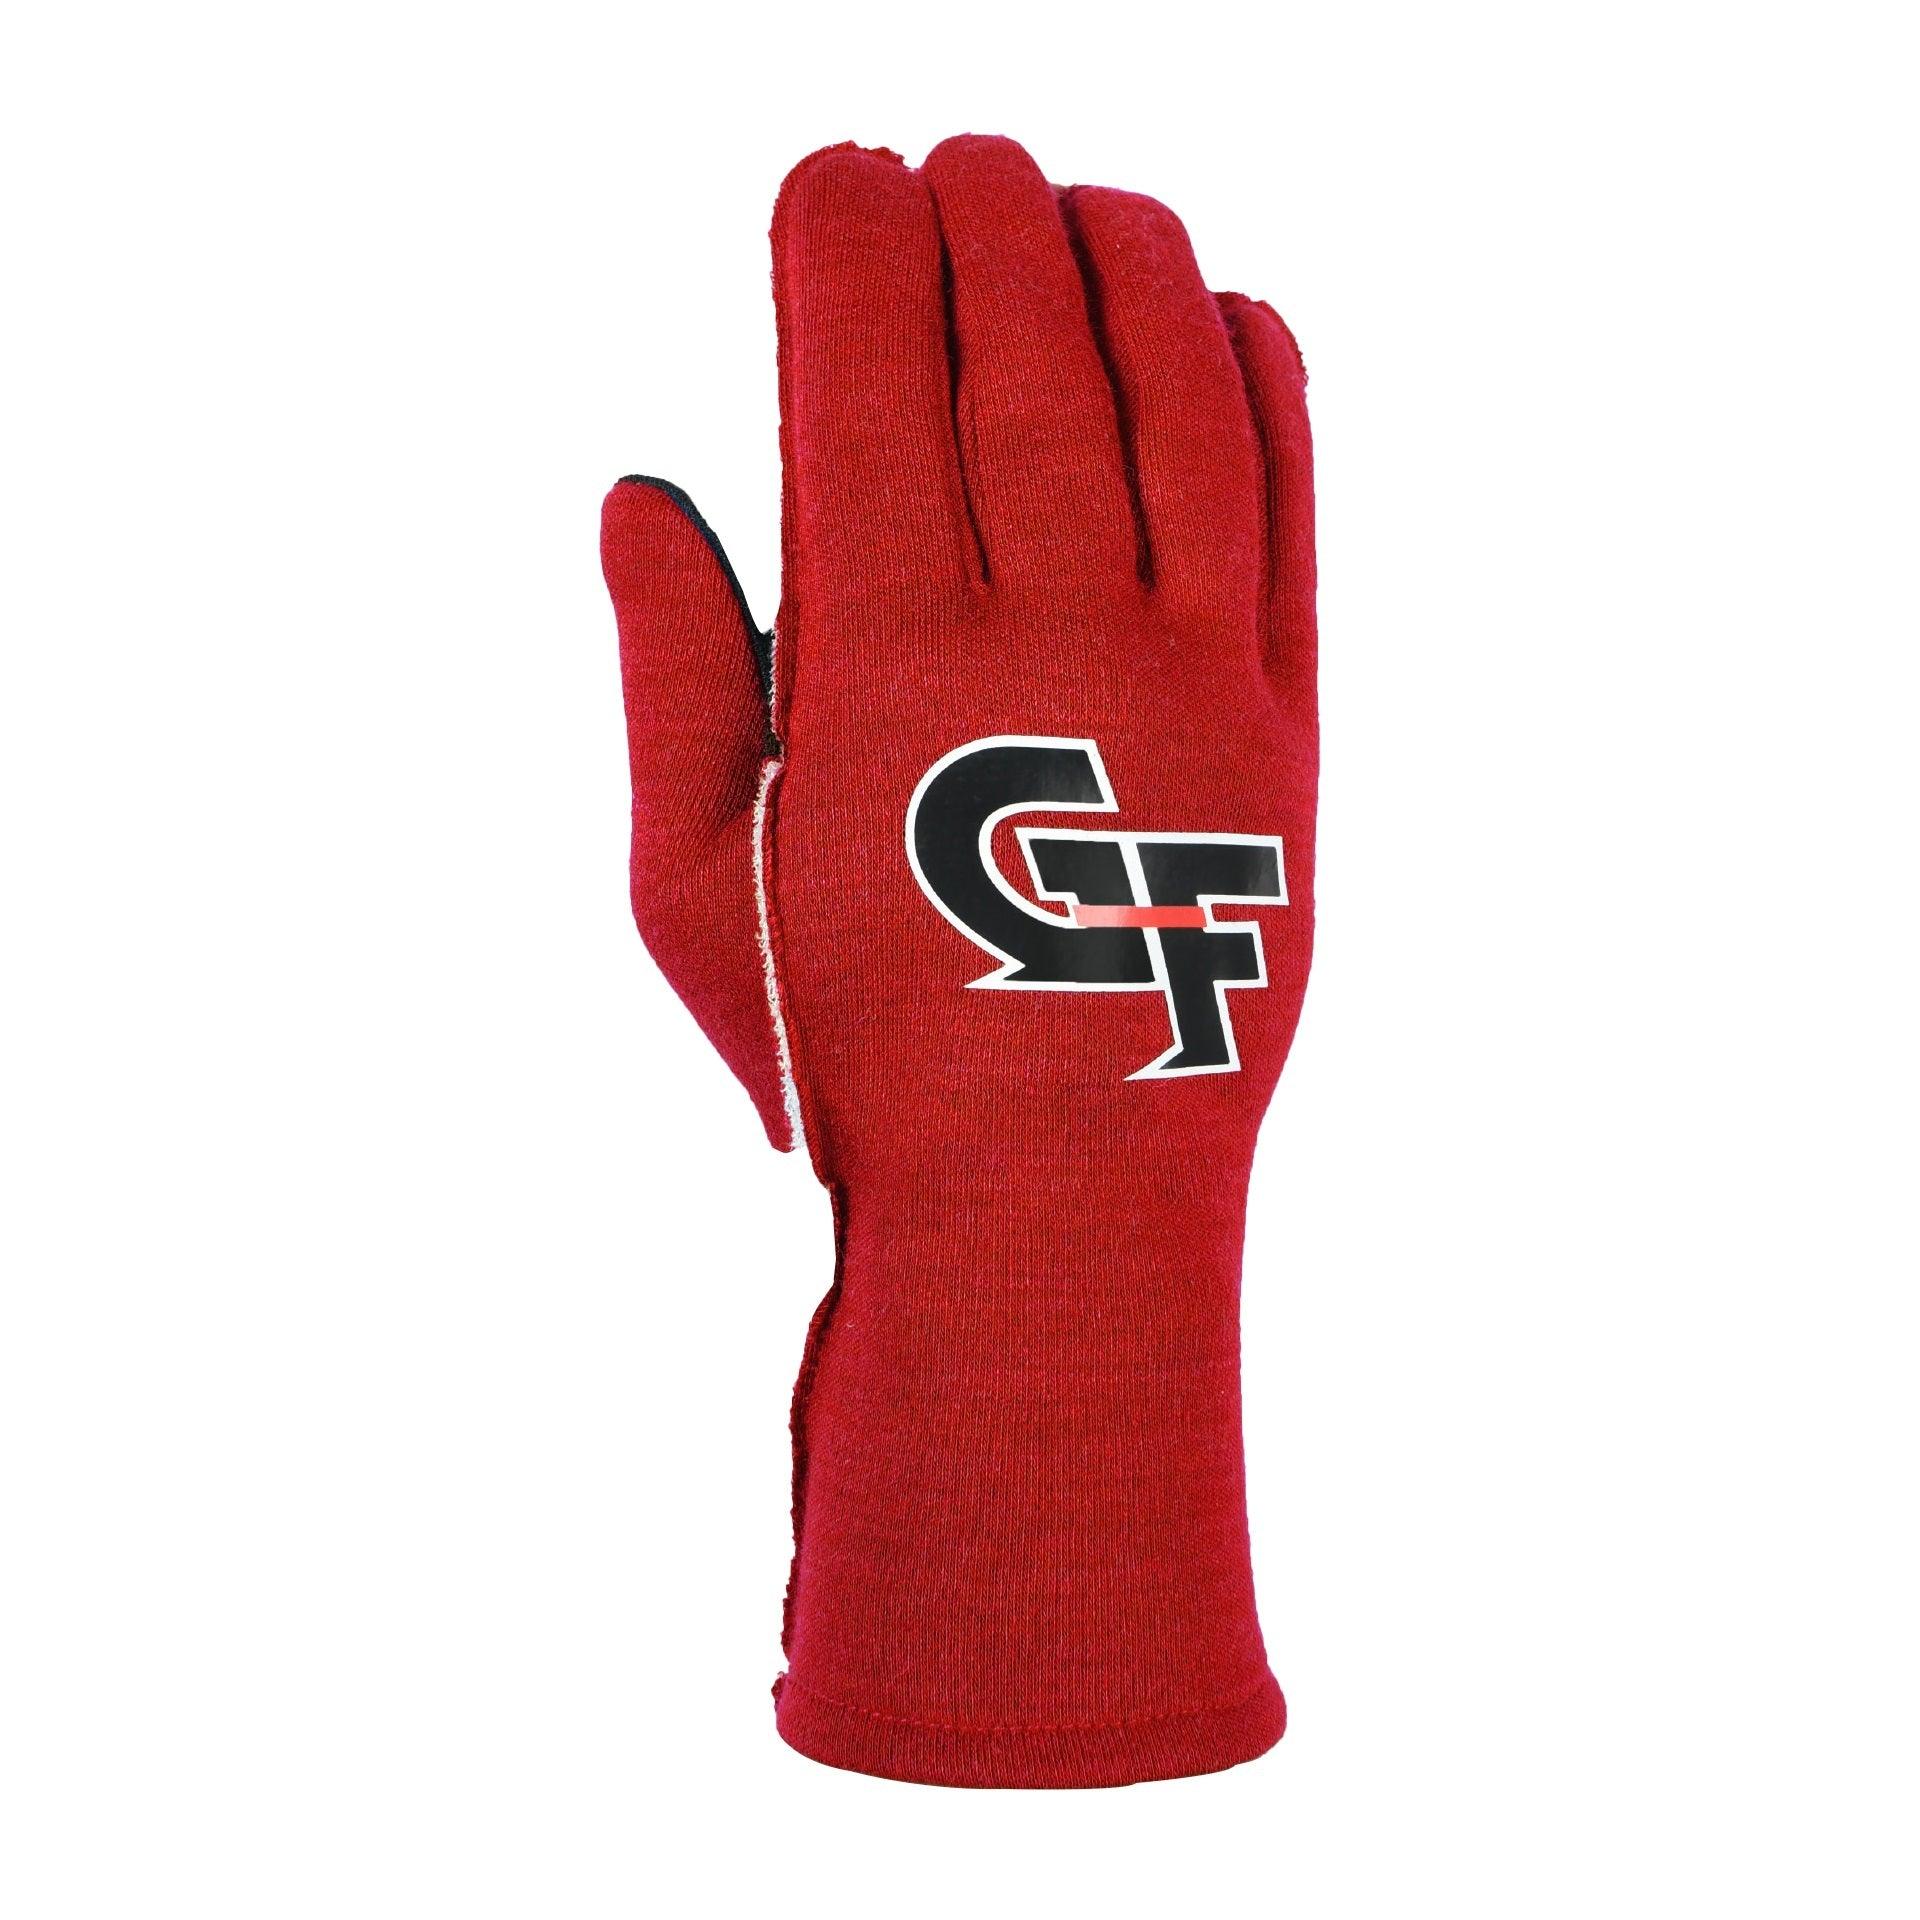 Gloves G-Limit XX-Small Red - Burlile Performance Products